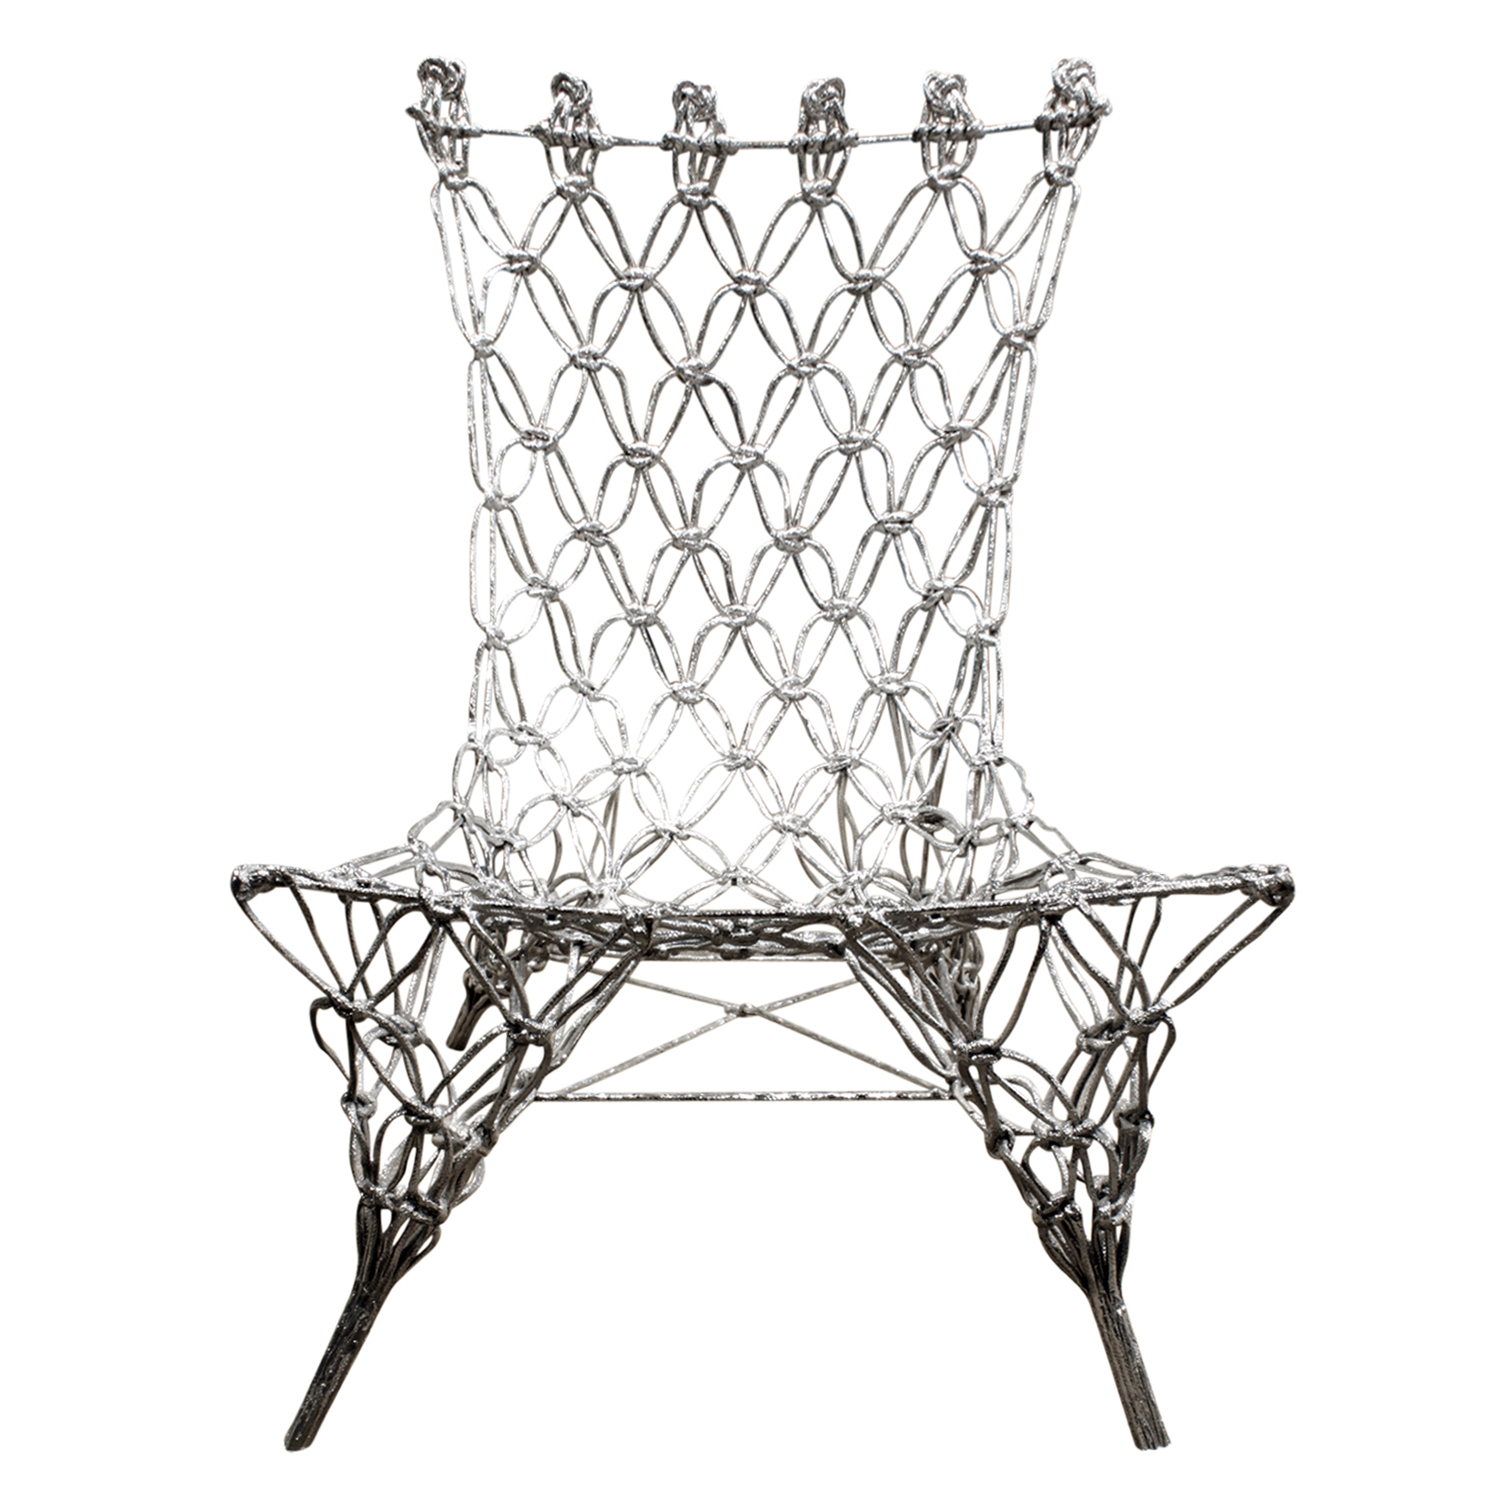 Rare Knotted chair by Marcel Wanders on artnet